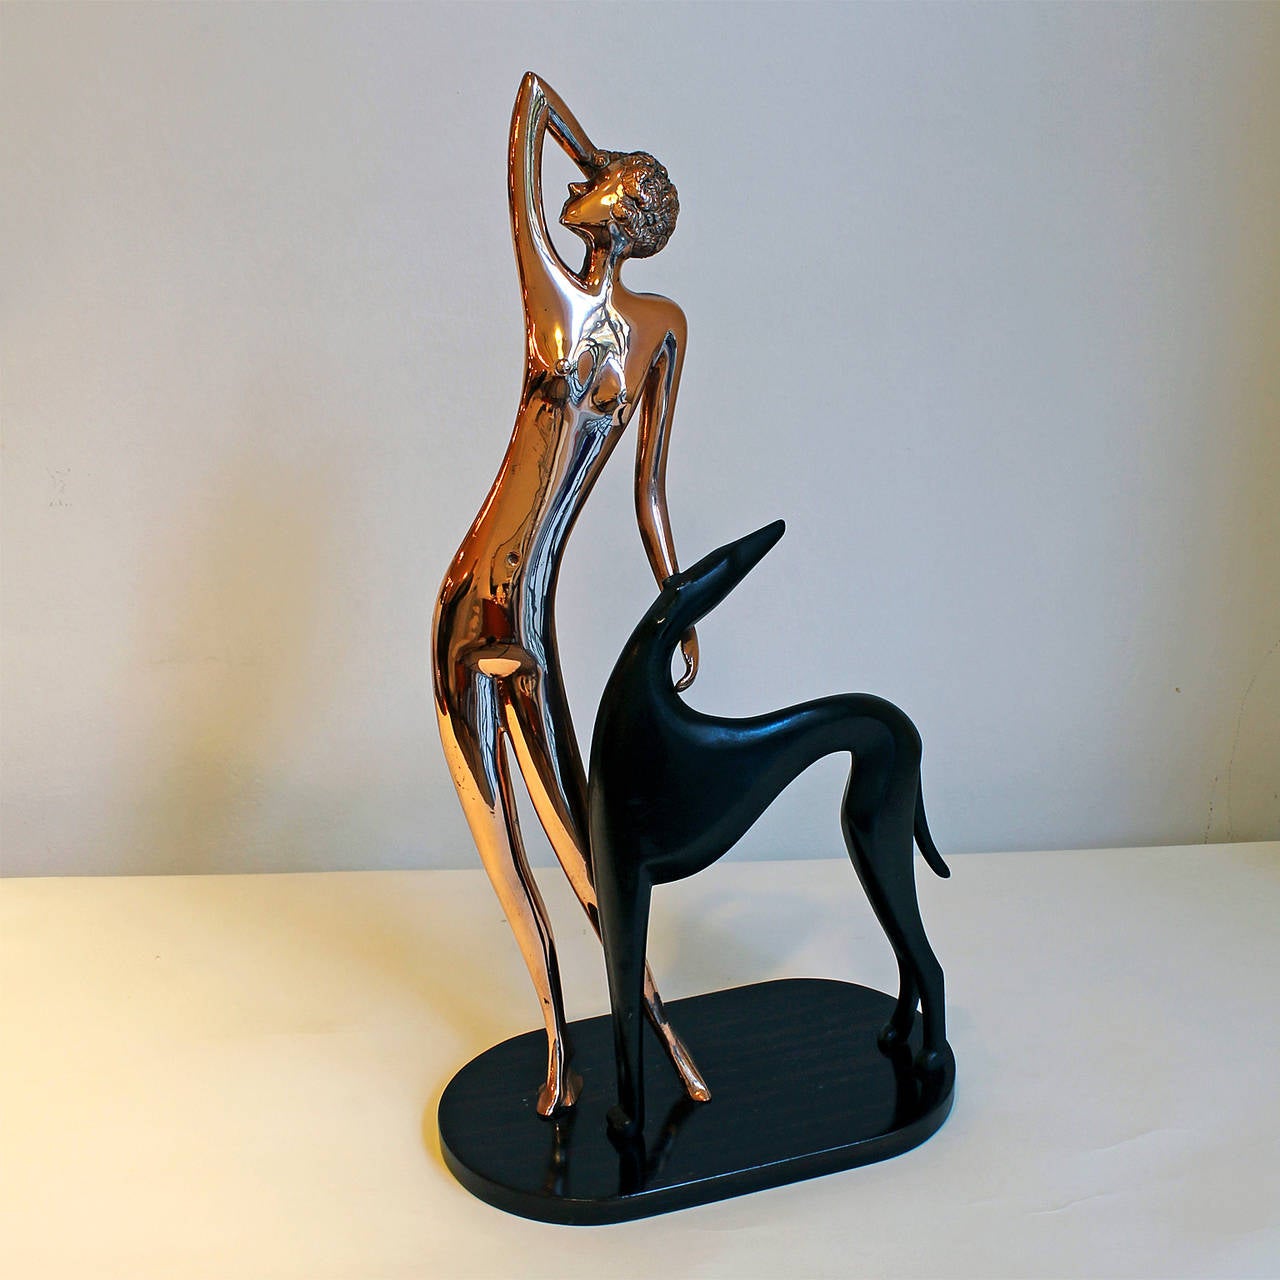 Sculpture by Hagenauer at 1stdibs